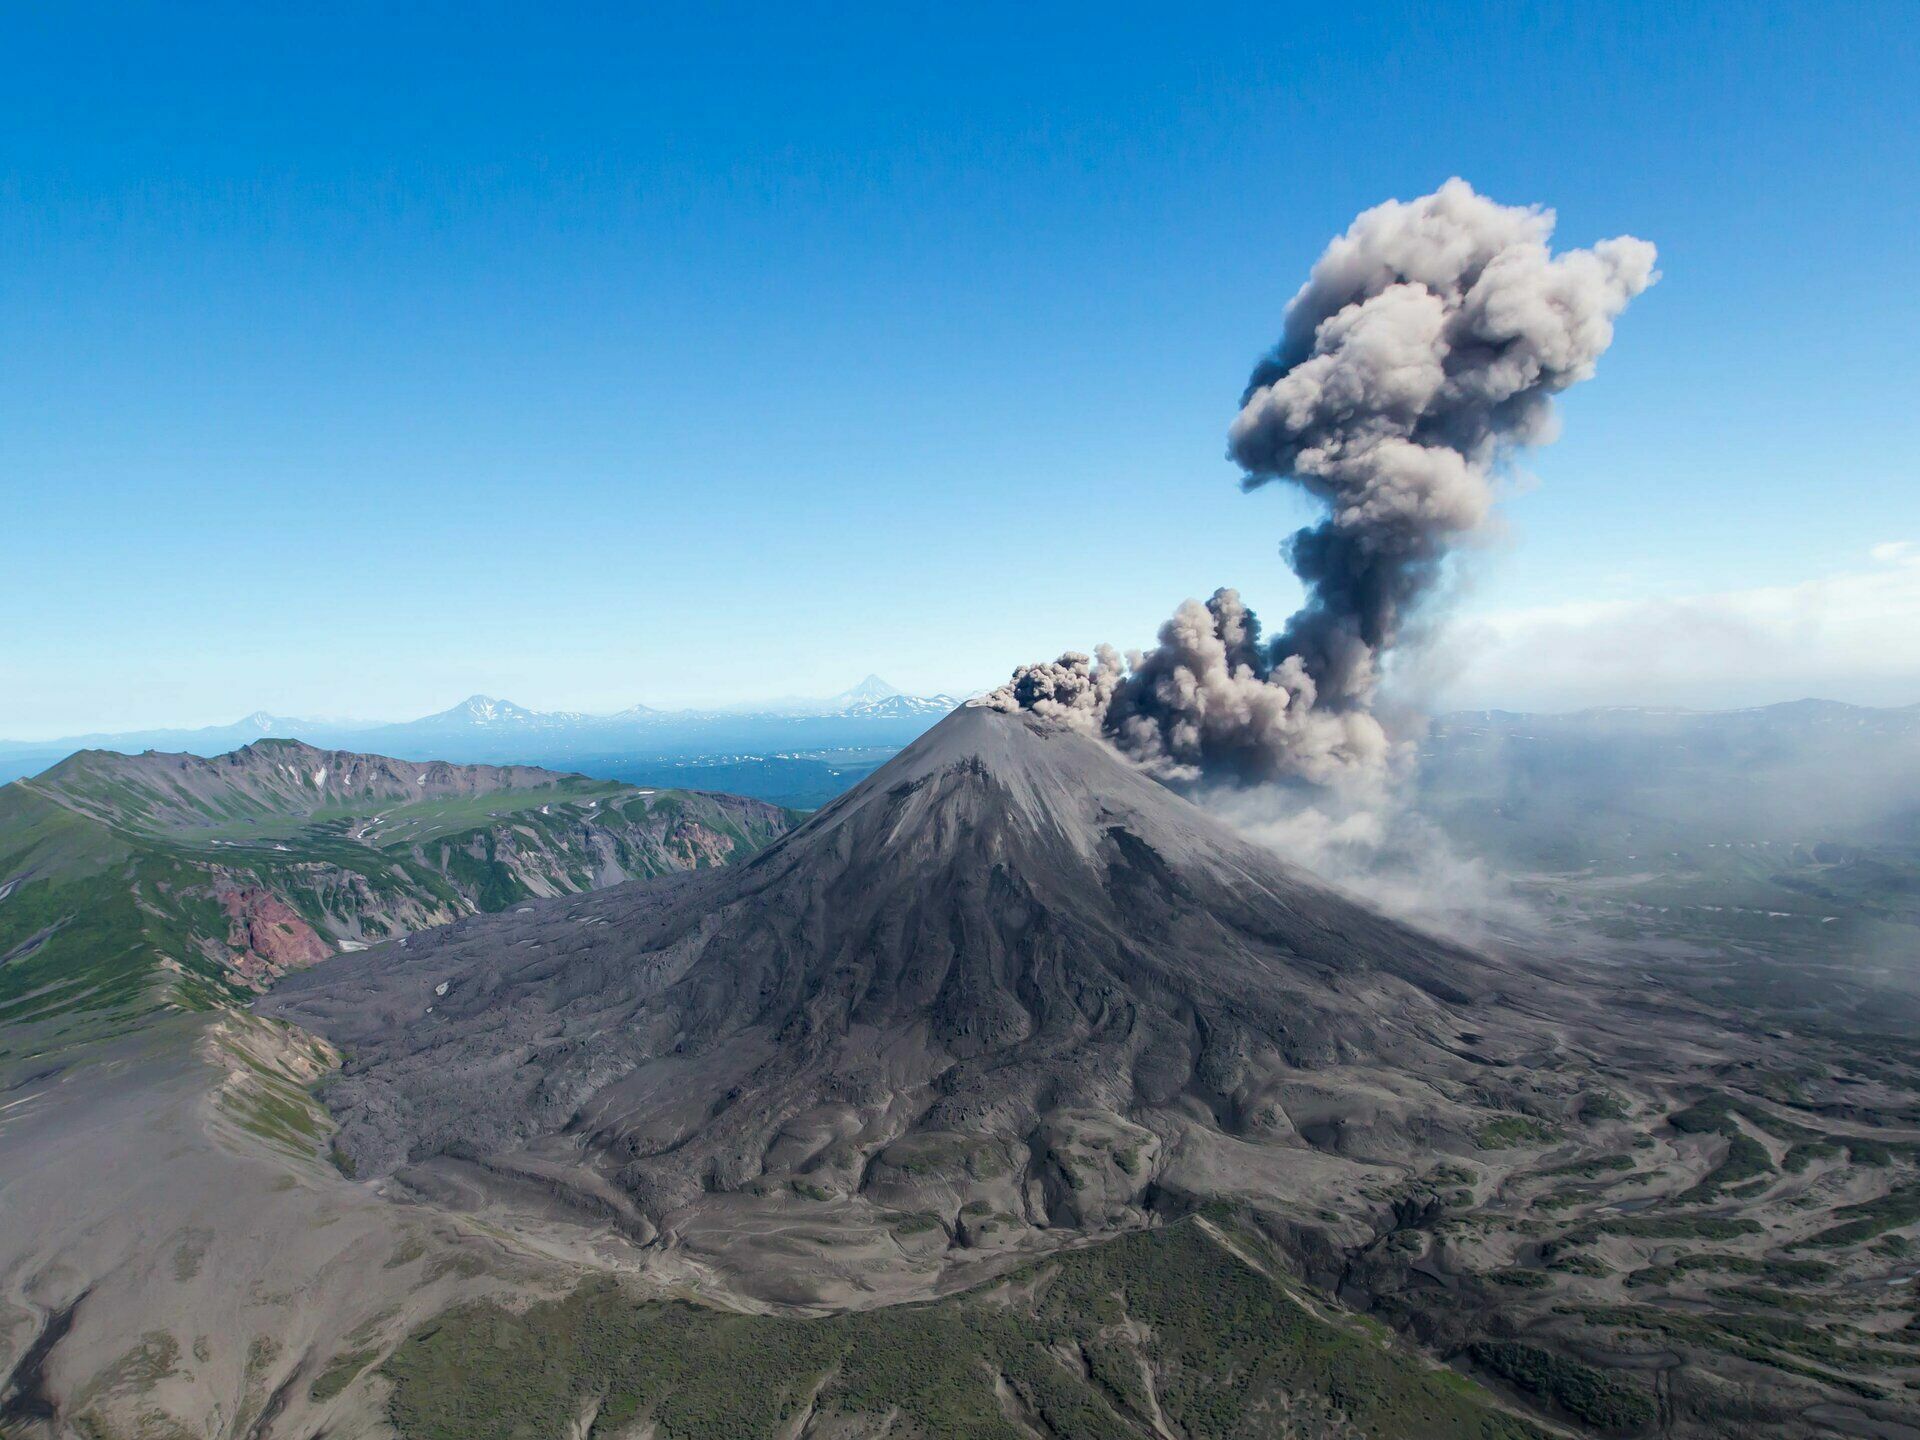 In Kamchatka, the Karymsky volcano threw ash to a height of 10 km